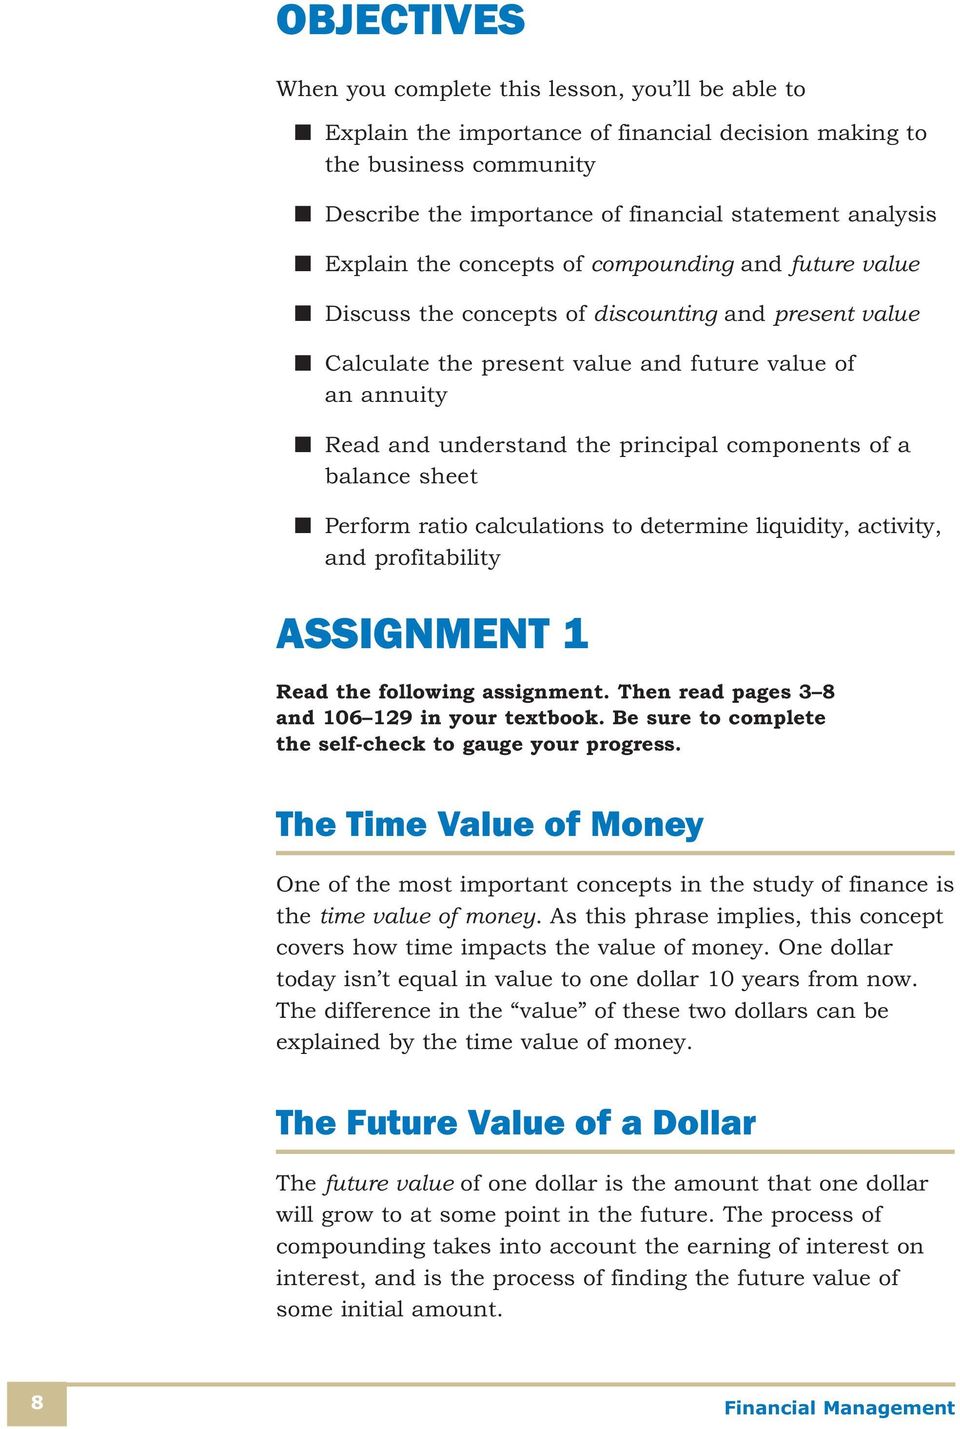 components of a balance sheet Perform ratio calculations to determine liquidity, activity, and profitability ASSIGNMENT 1 Read the following assignment.